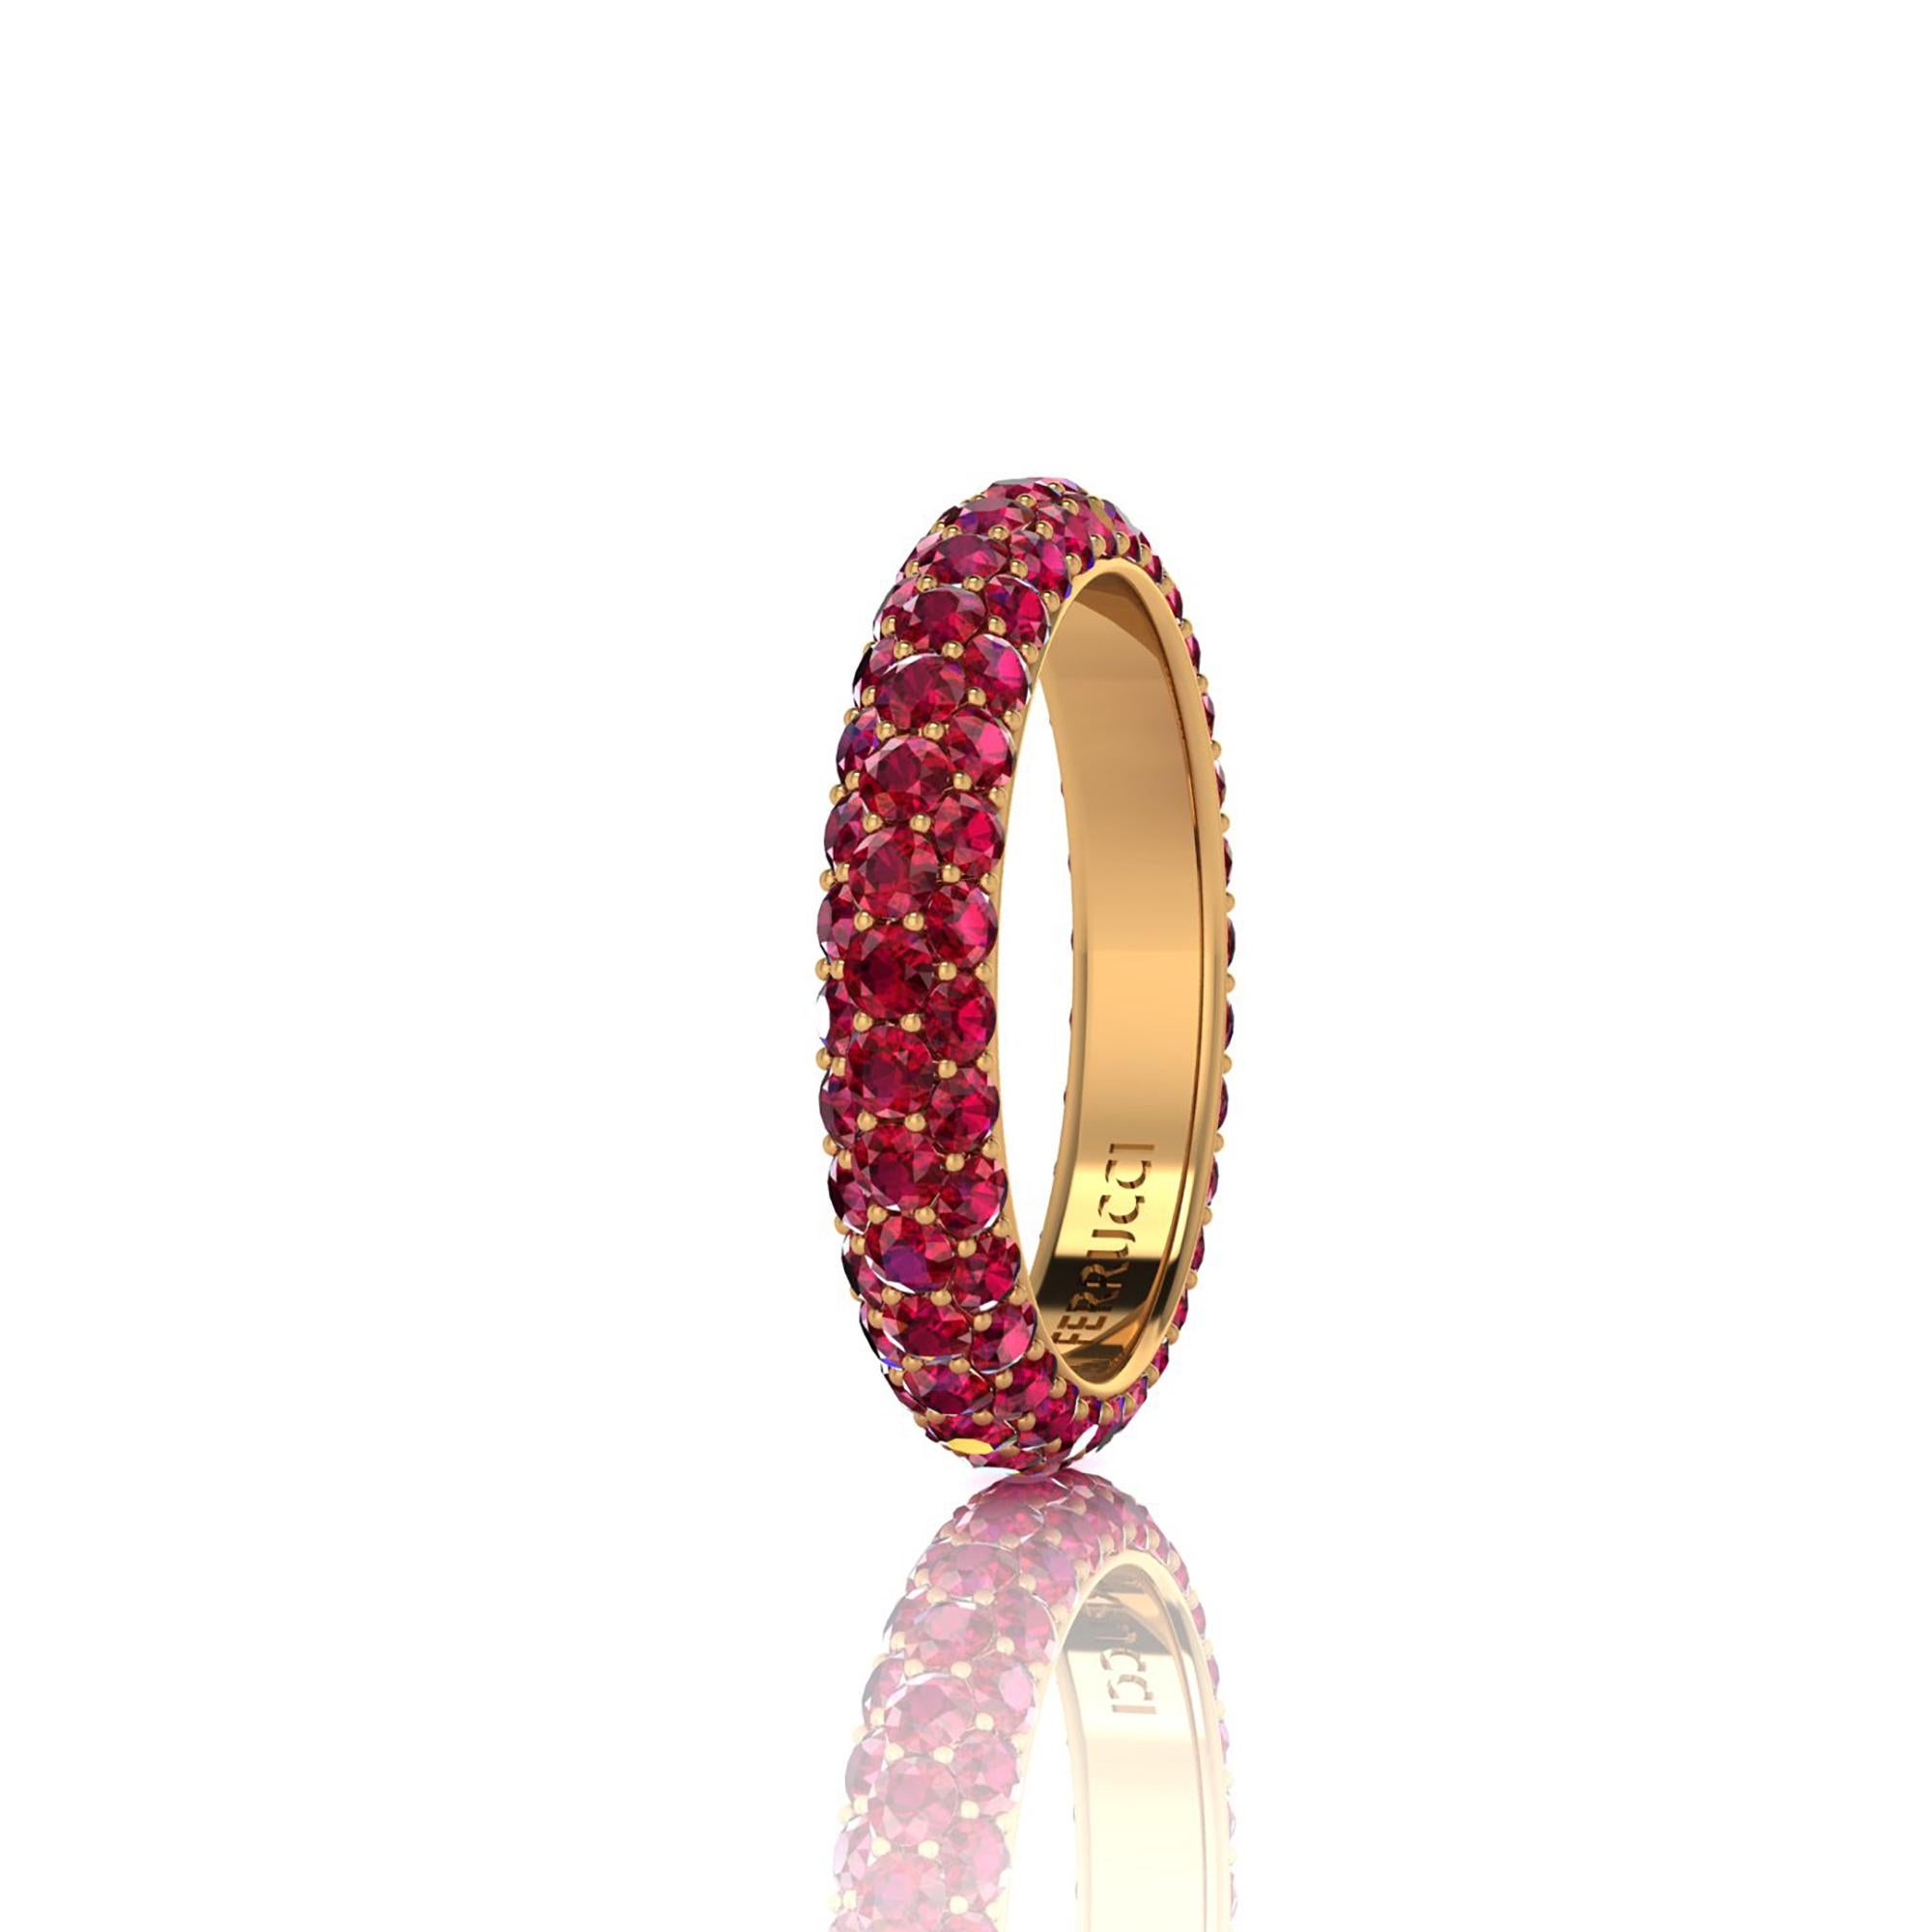  Ruby eternity ring,  an approximate total carat weight of 3.2 carat, hand made in New York City with the best Italian craftsmanship, conceived in 18k yellow gold, each ruby is hand picked and selected for its outstanding red color and clarity,